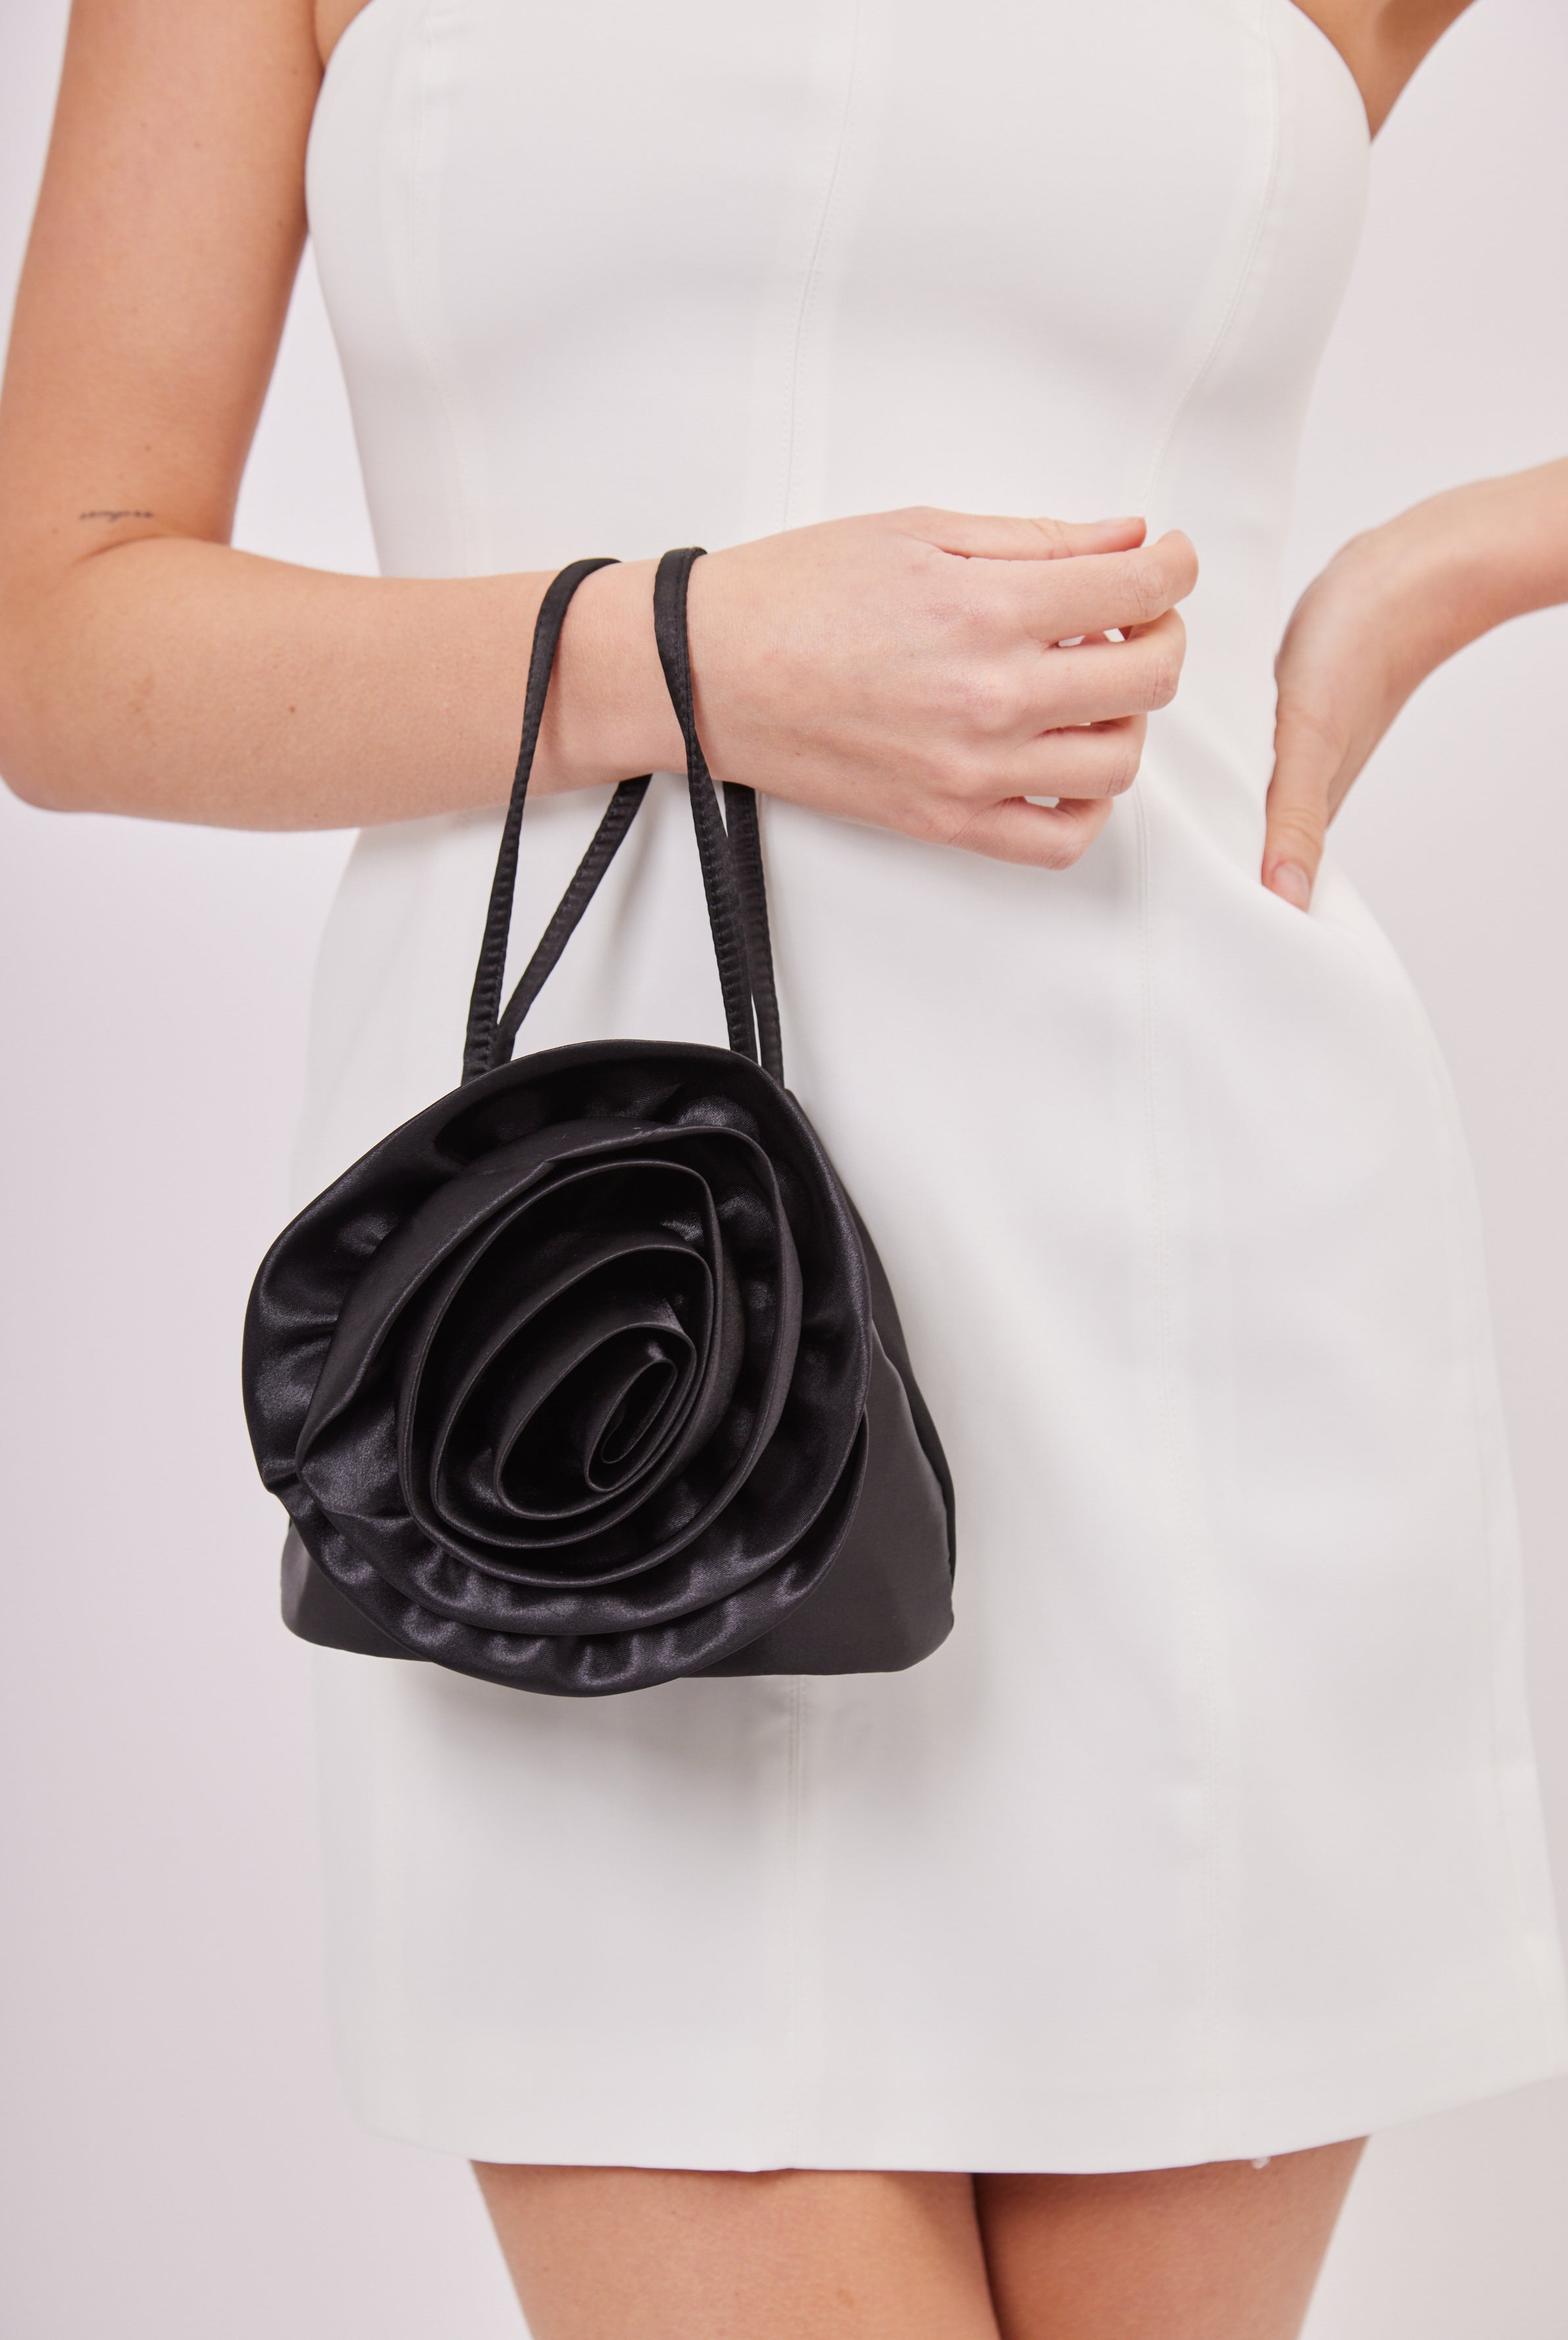 Flower Satin Bag in Black | occasion bag | occasion accessories | party bag | date accessories | wedding guest accessories | wedding accessories | races accessories | summer bag | glam bag | going out bag | drawstring bag | grab bag | y2k bag | 90s bag | y2k accessories | 90s accessories | black bag | corsage bag | women's bag | summer bag | holiday bag